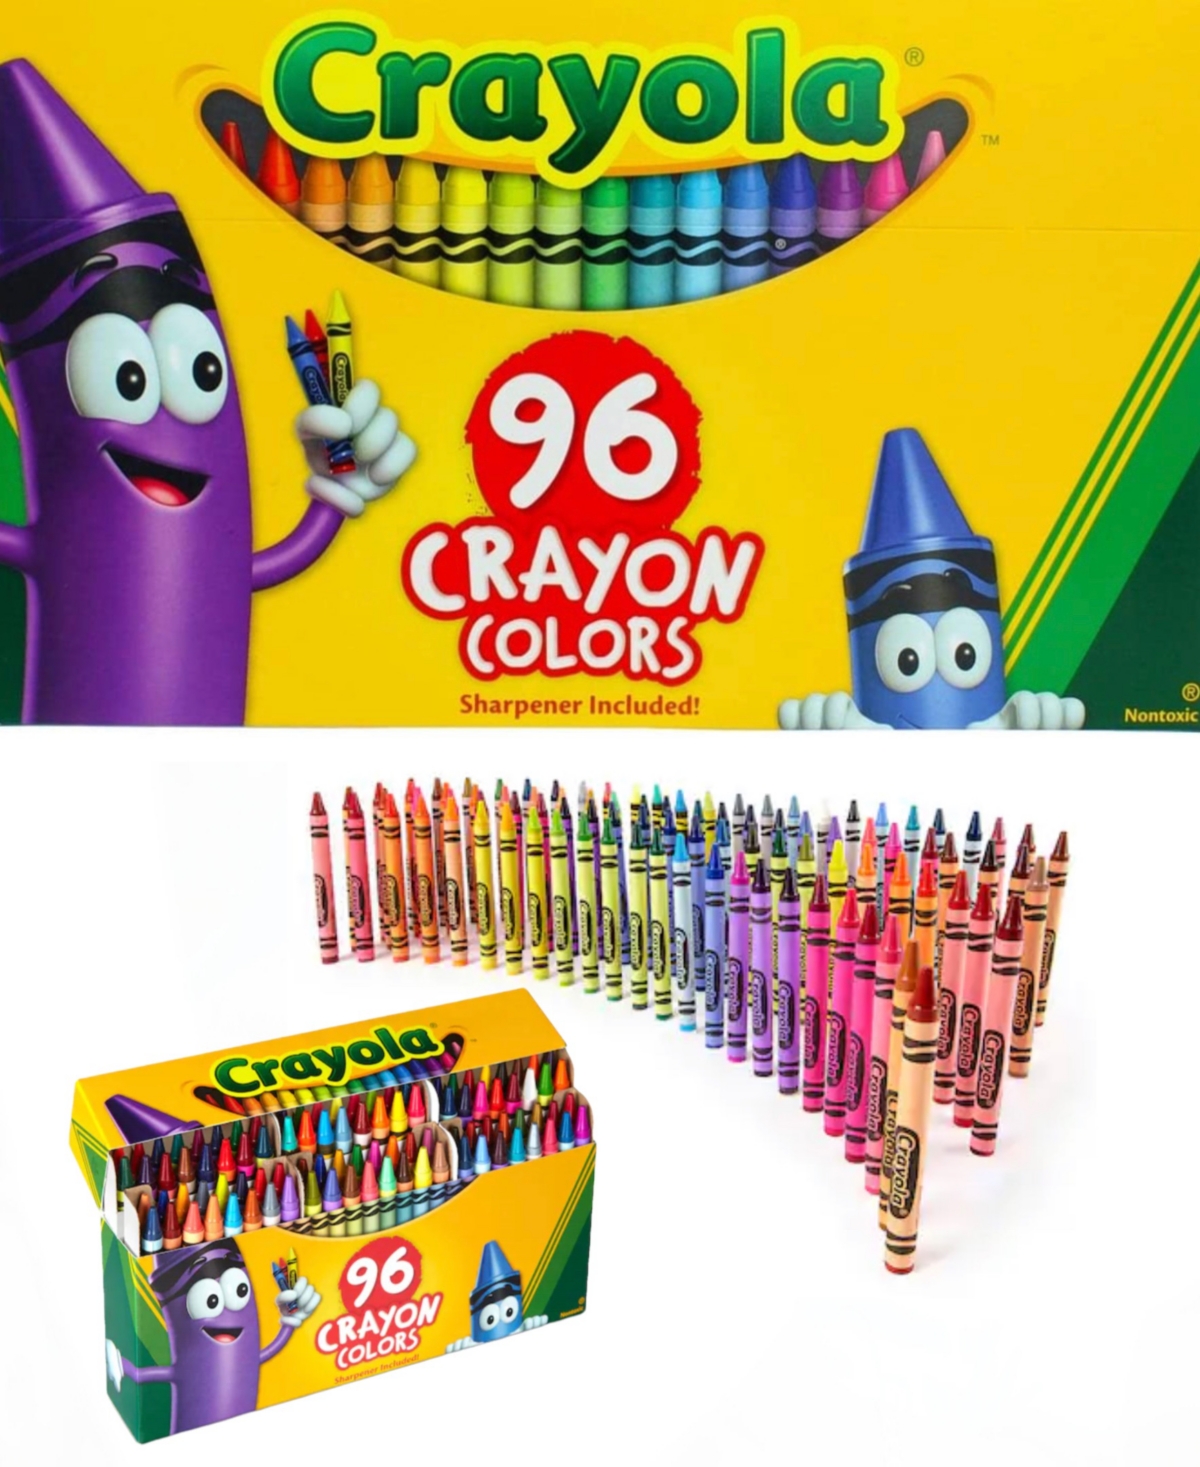 Crayola- My 96 Crayons Comes With a Sharpener - Multi Colored